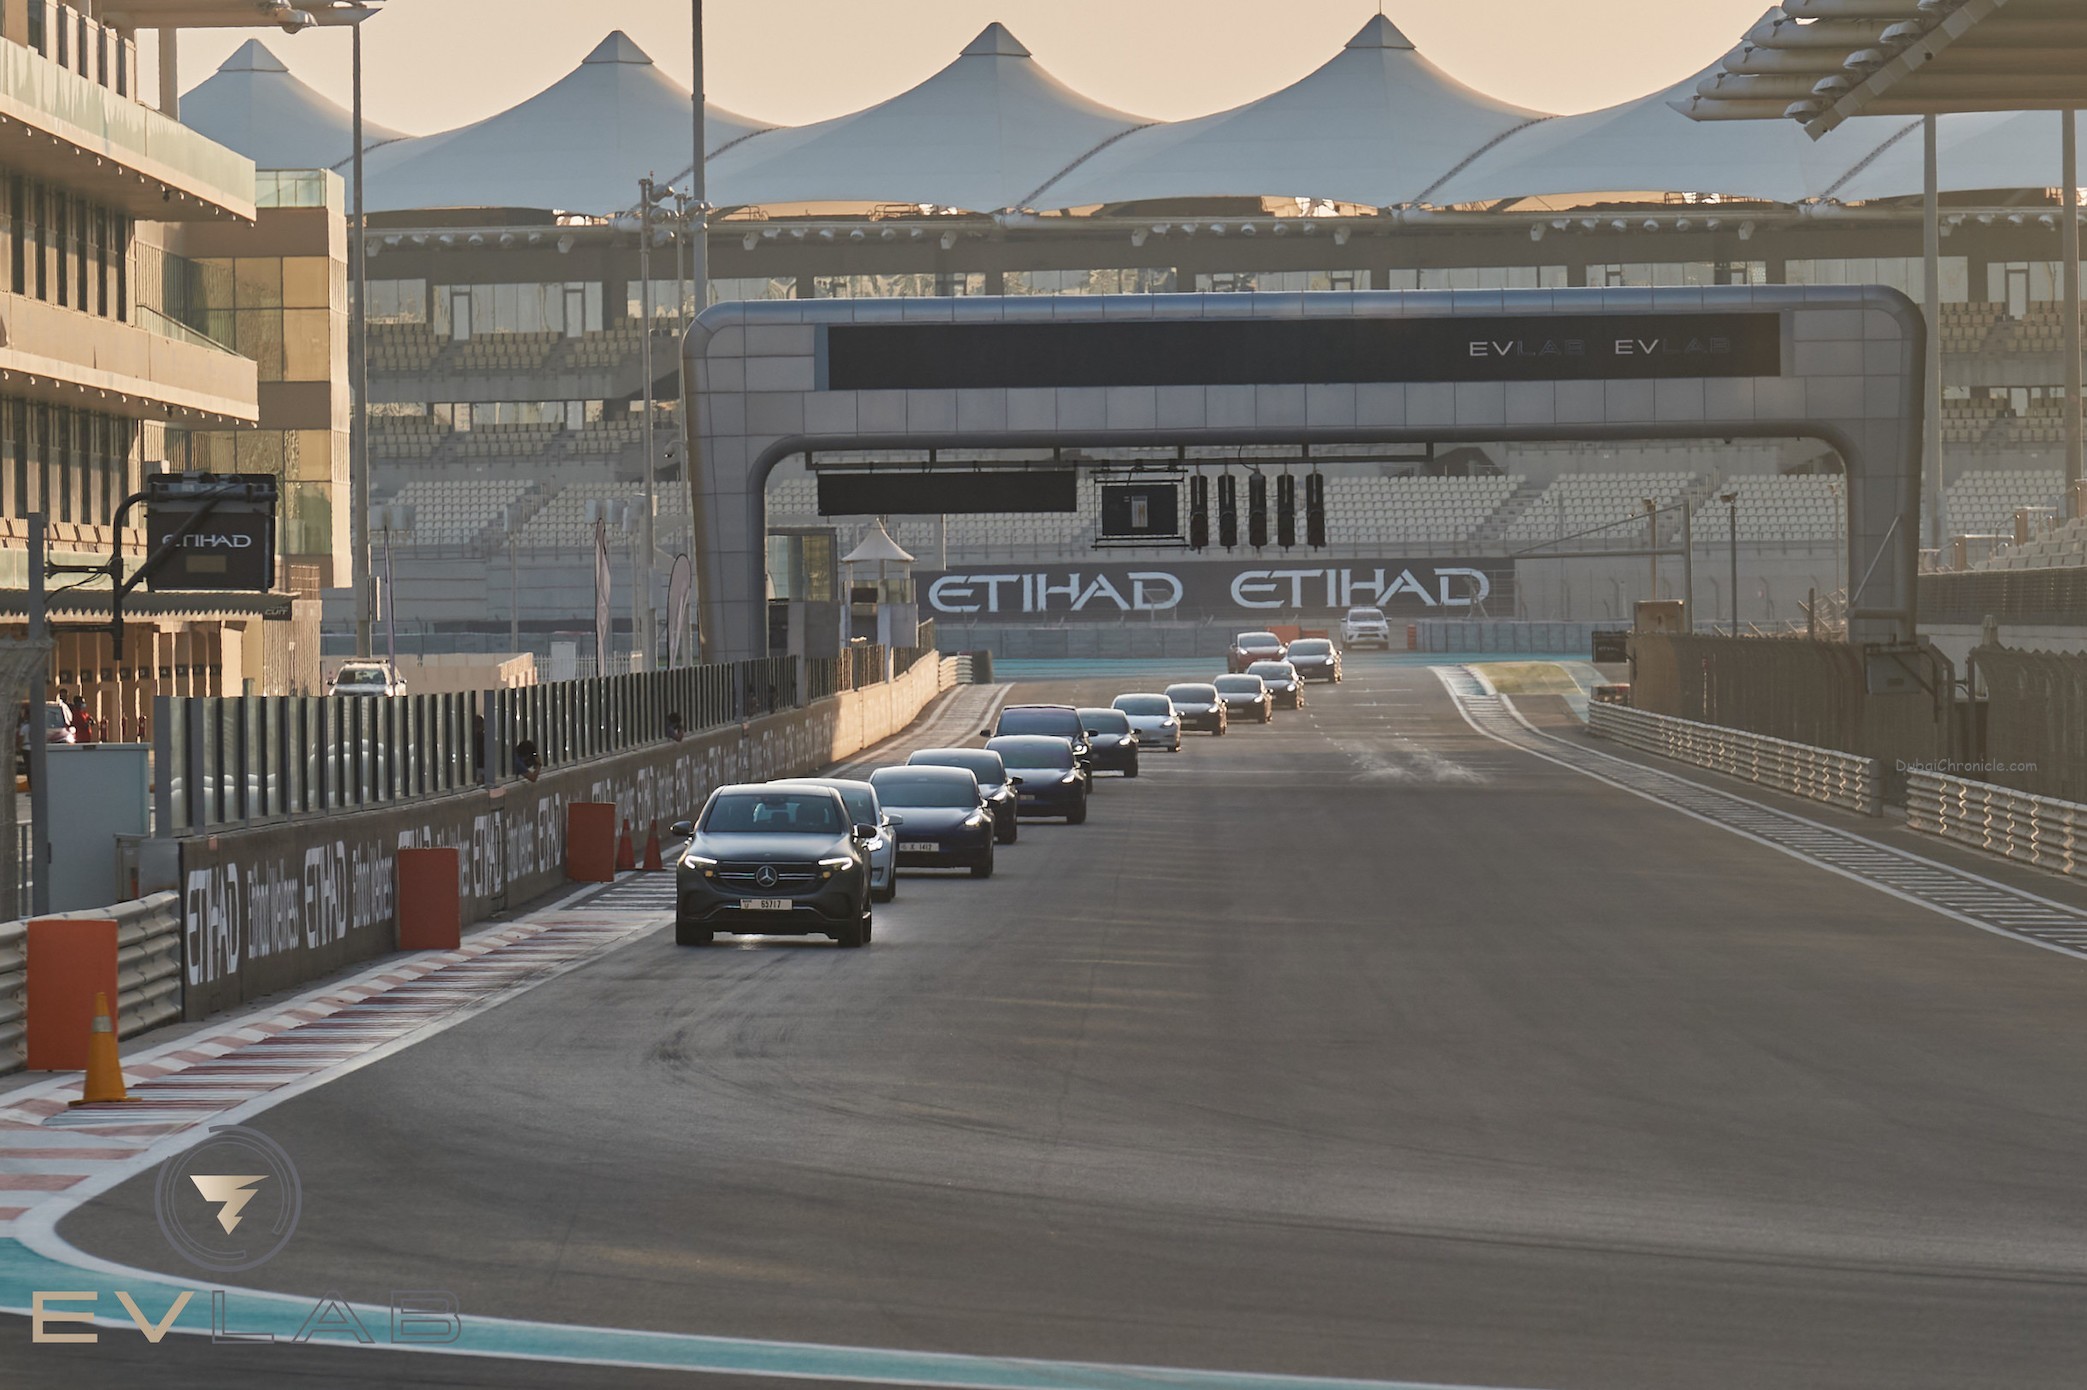 EV Lab, a multi-brand electric vehicle platform, hosted a dedicated Track Day event in Abu Dhabi’s Yas Marina F1 Circuit.